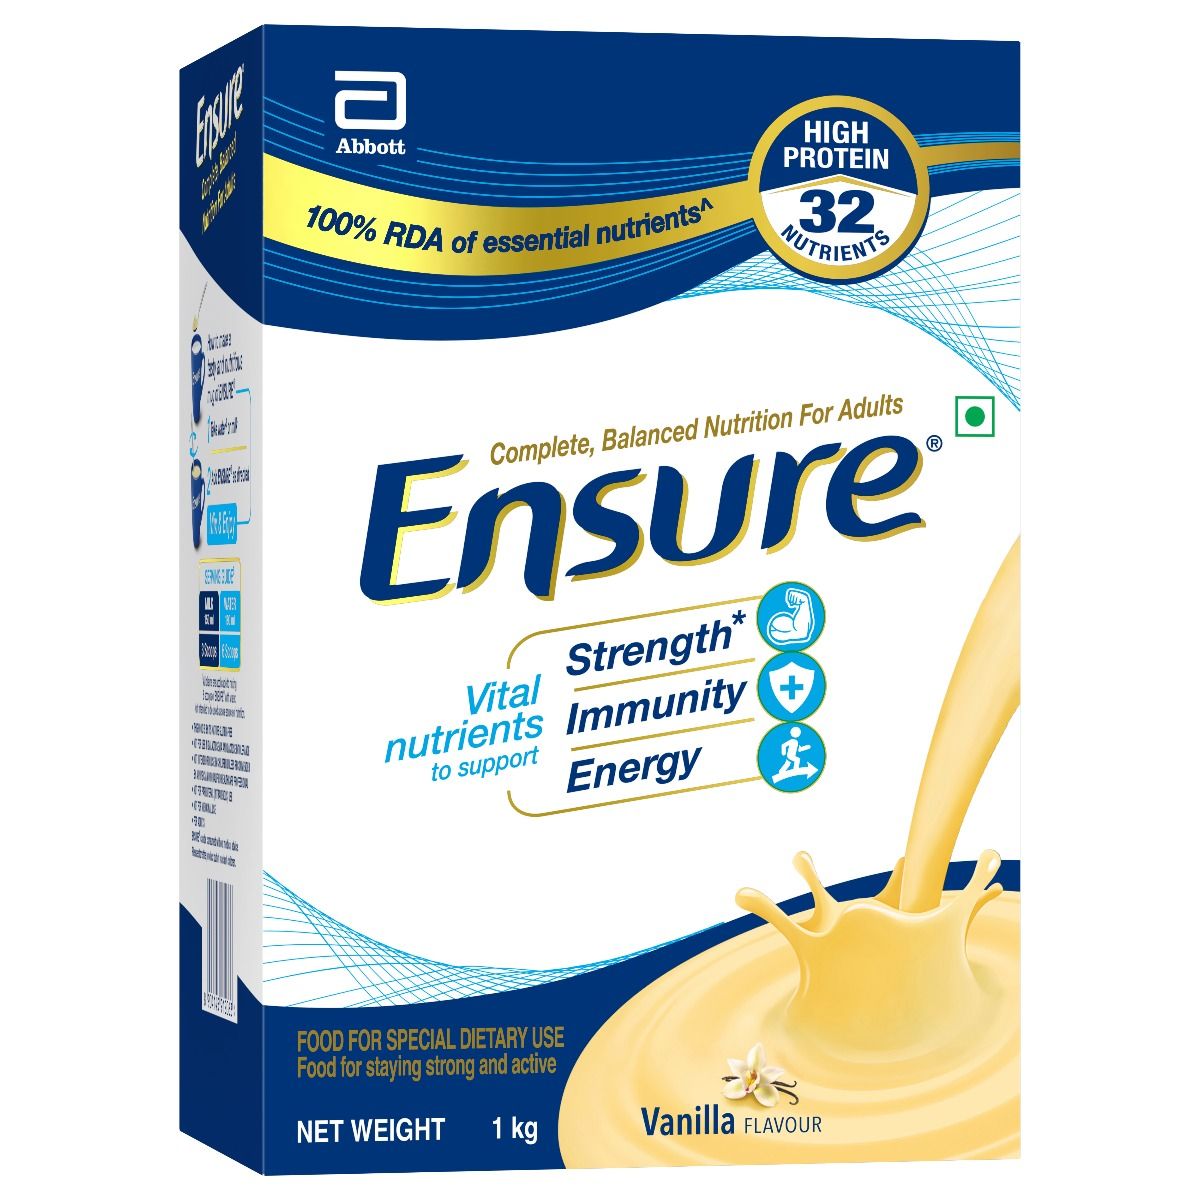 Ensure Vanilla Flavoured Powder, 1 Kg Refill Pack, Pack of 1 